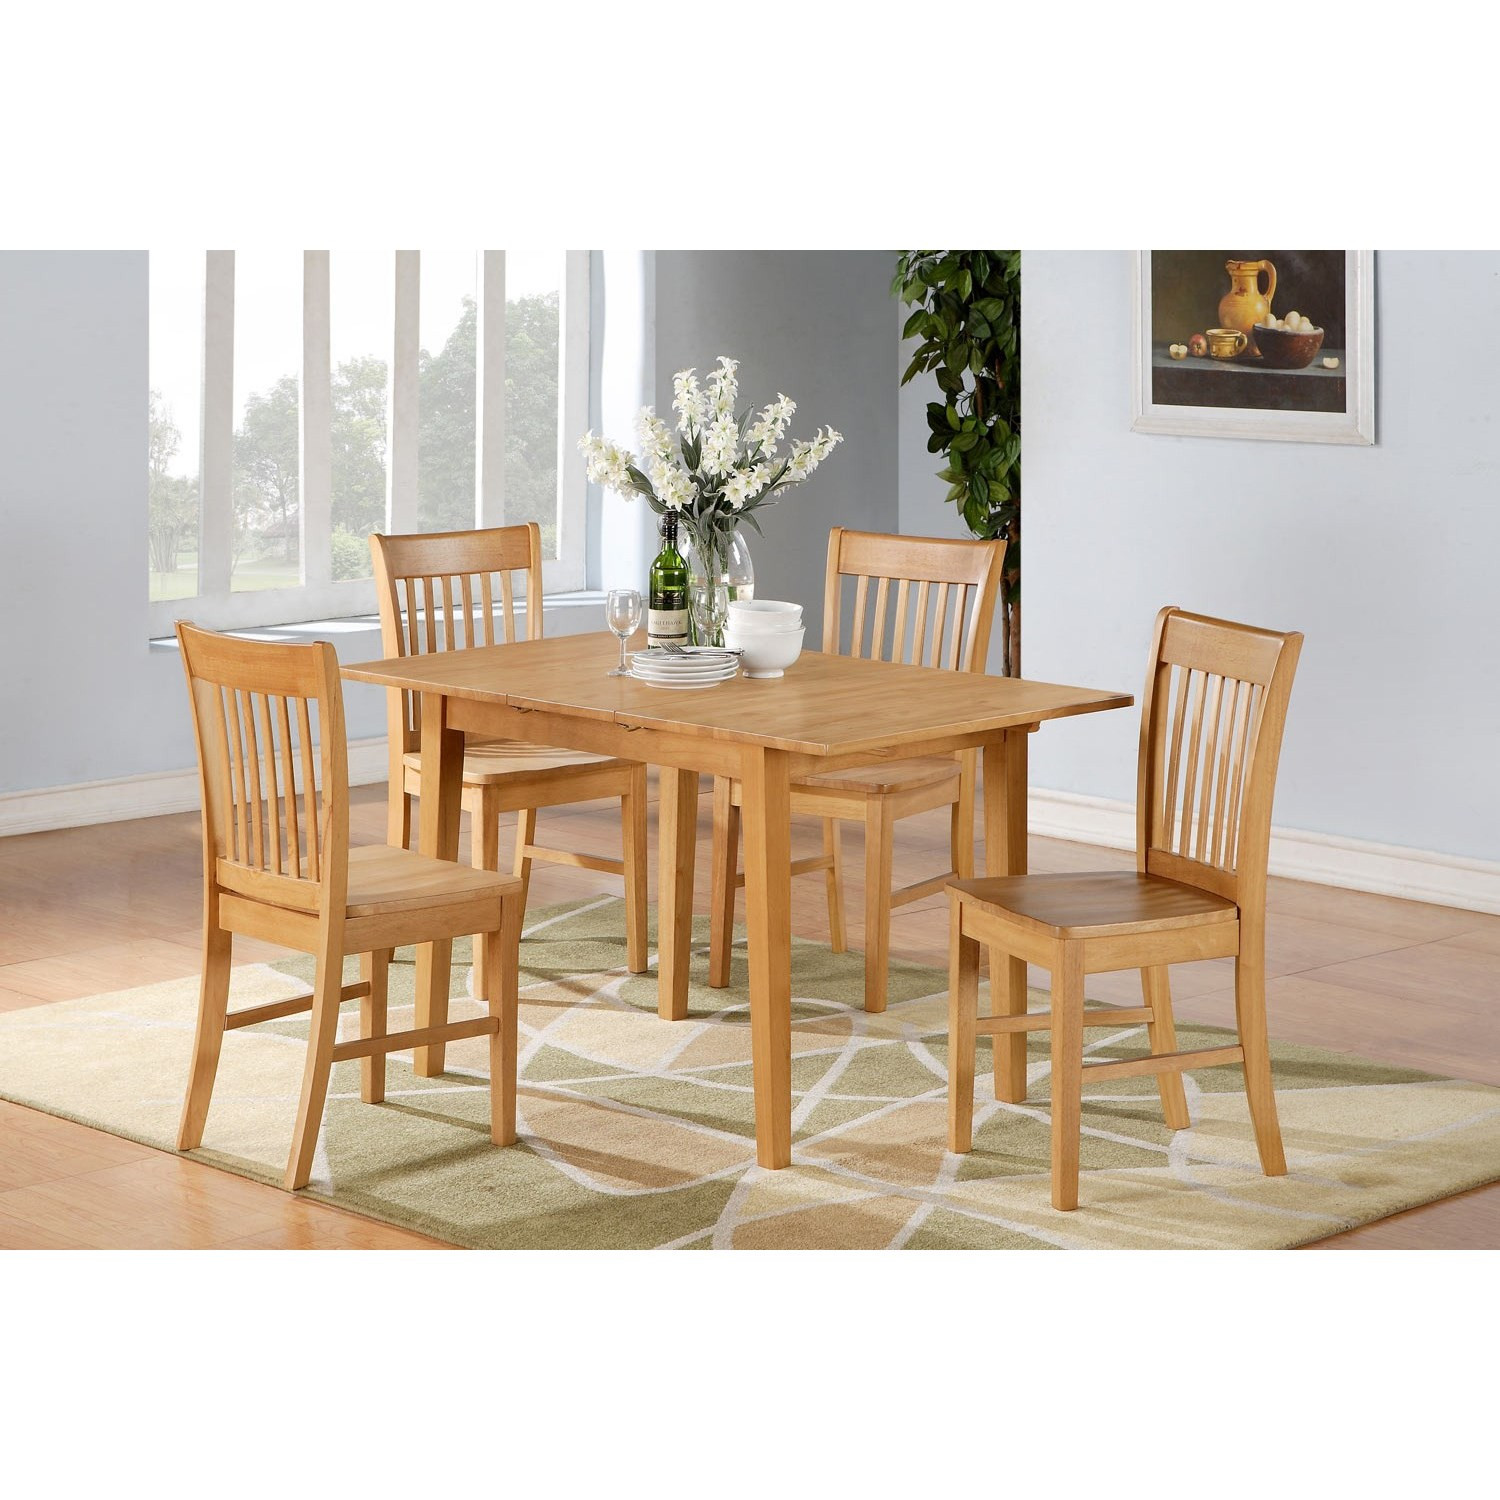 Dinette Set for Small Kitchen Elegant Kitchen Perfect for Kitchen and Small area with 3 Piece